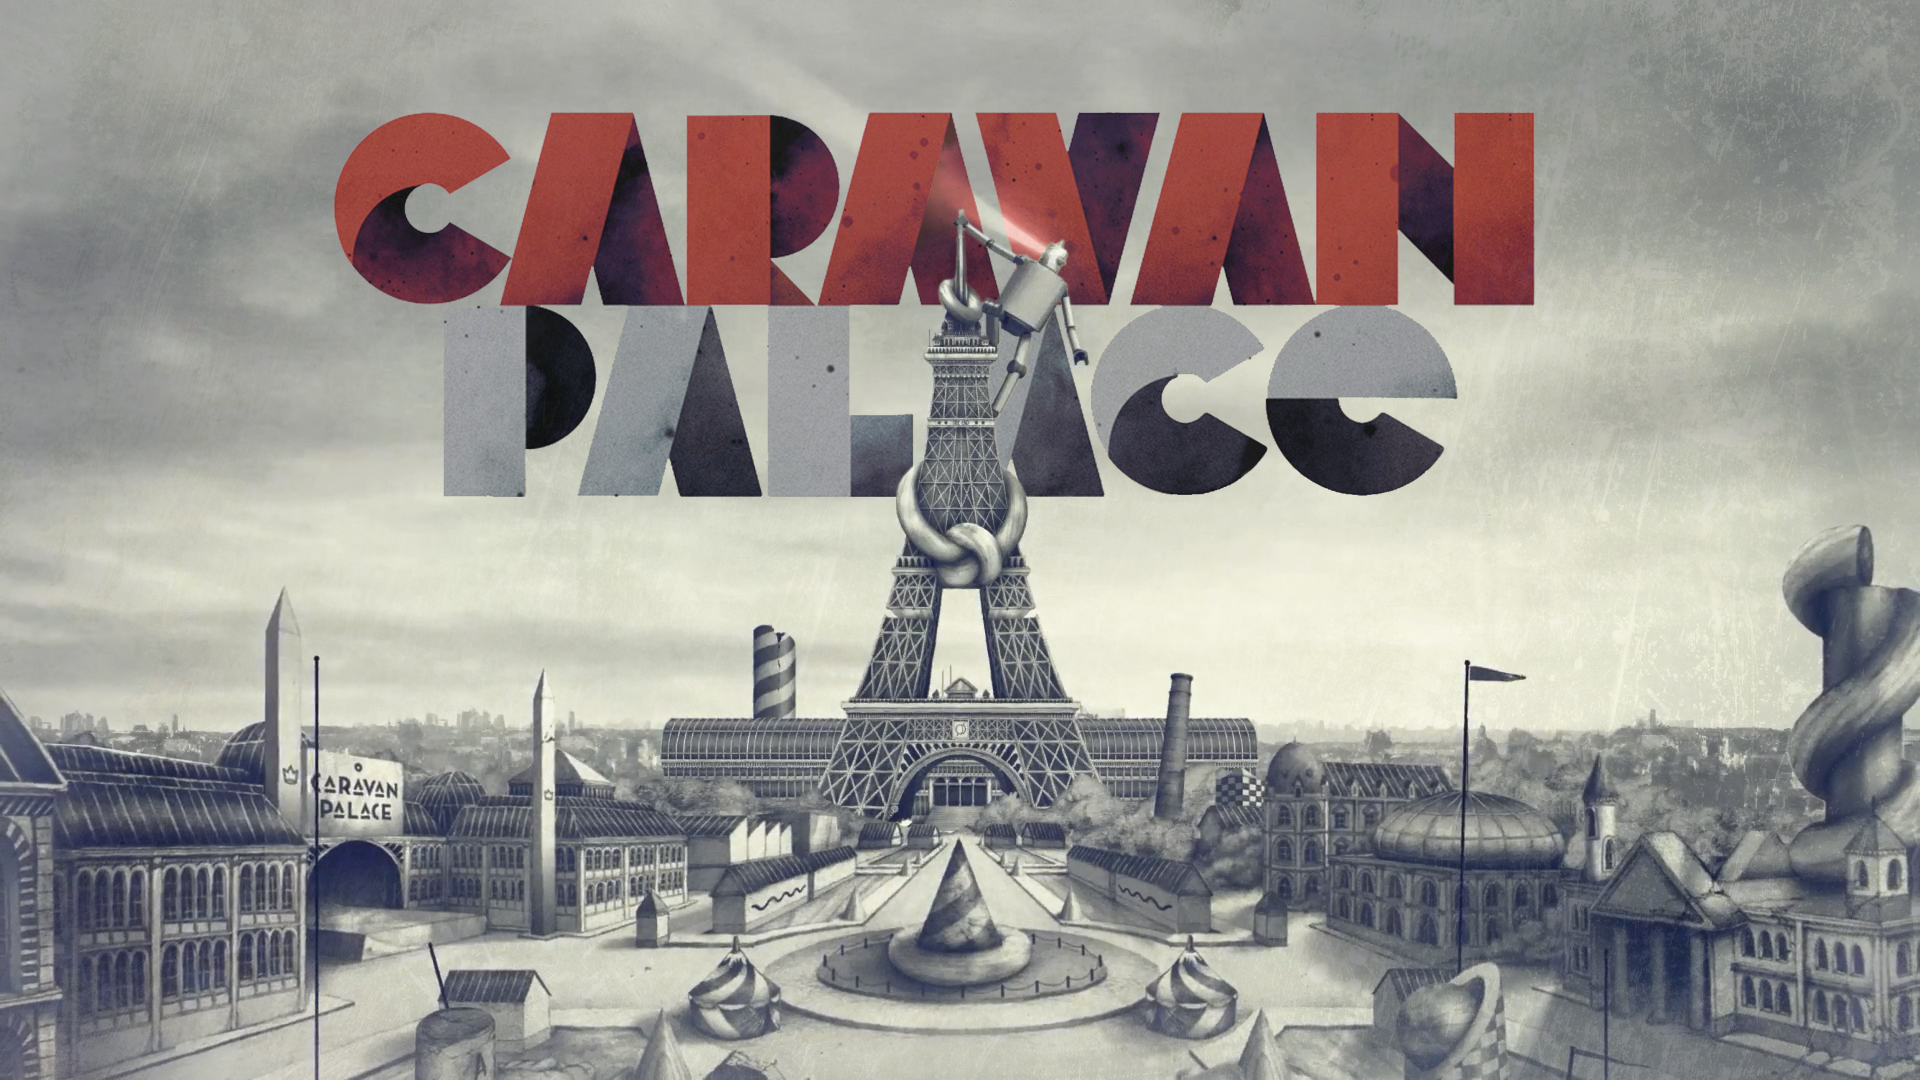 Caravan Palace By Nathanthemighty